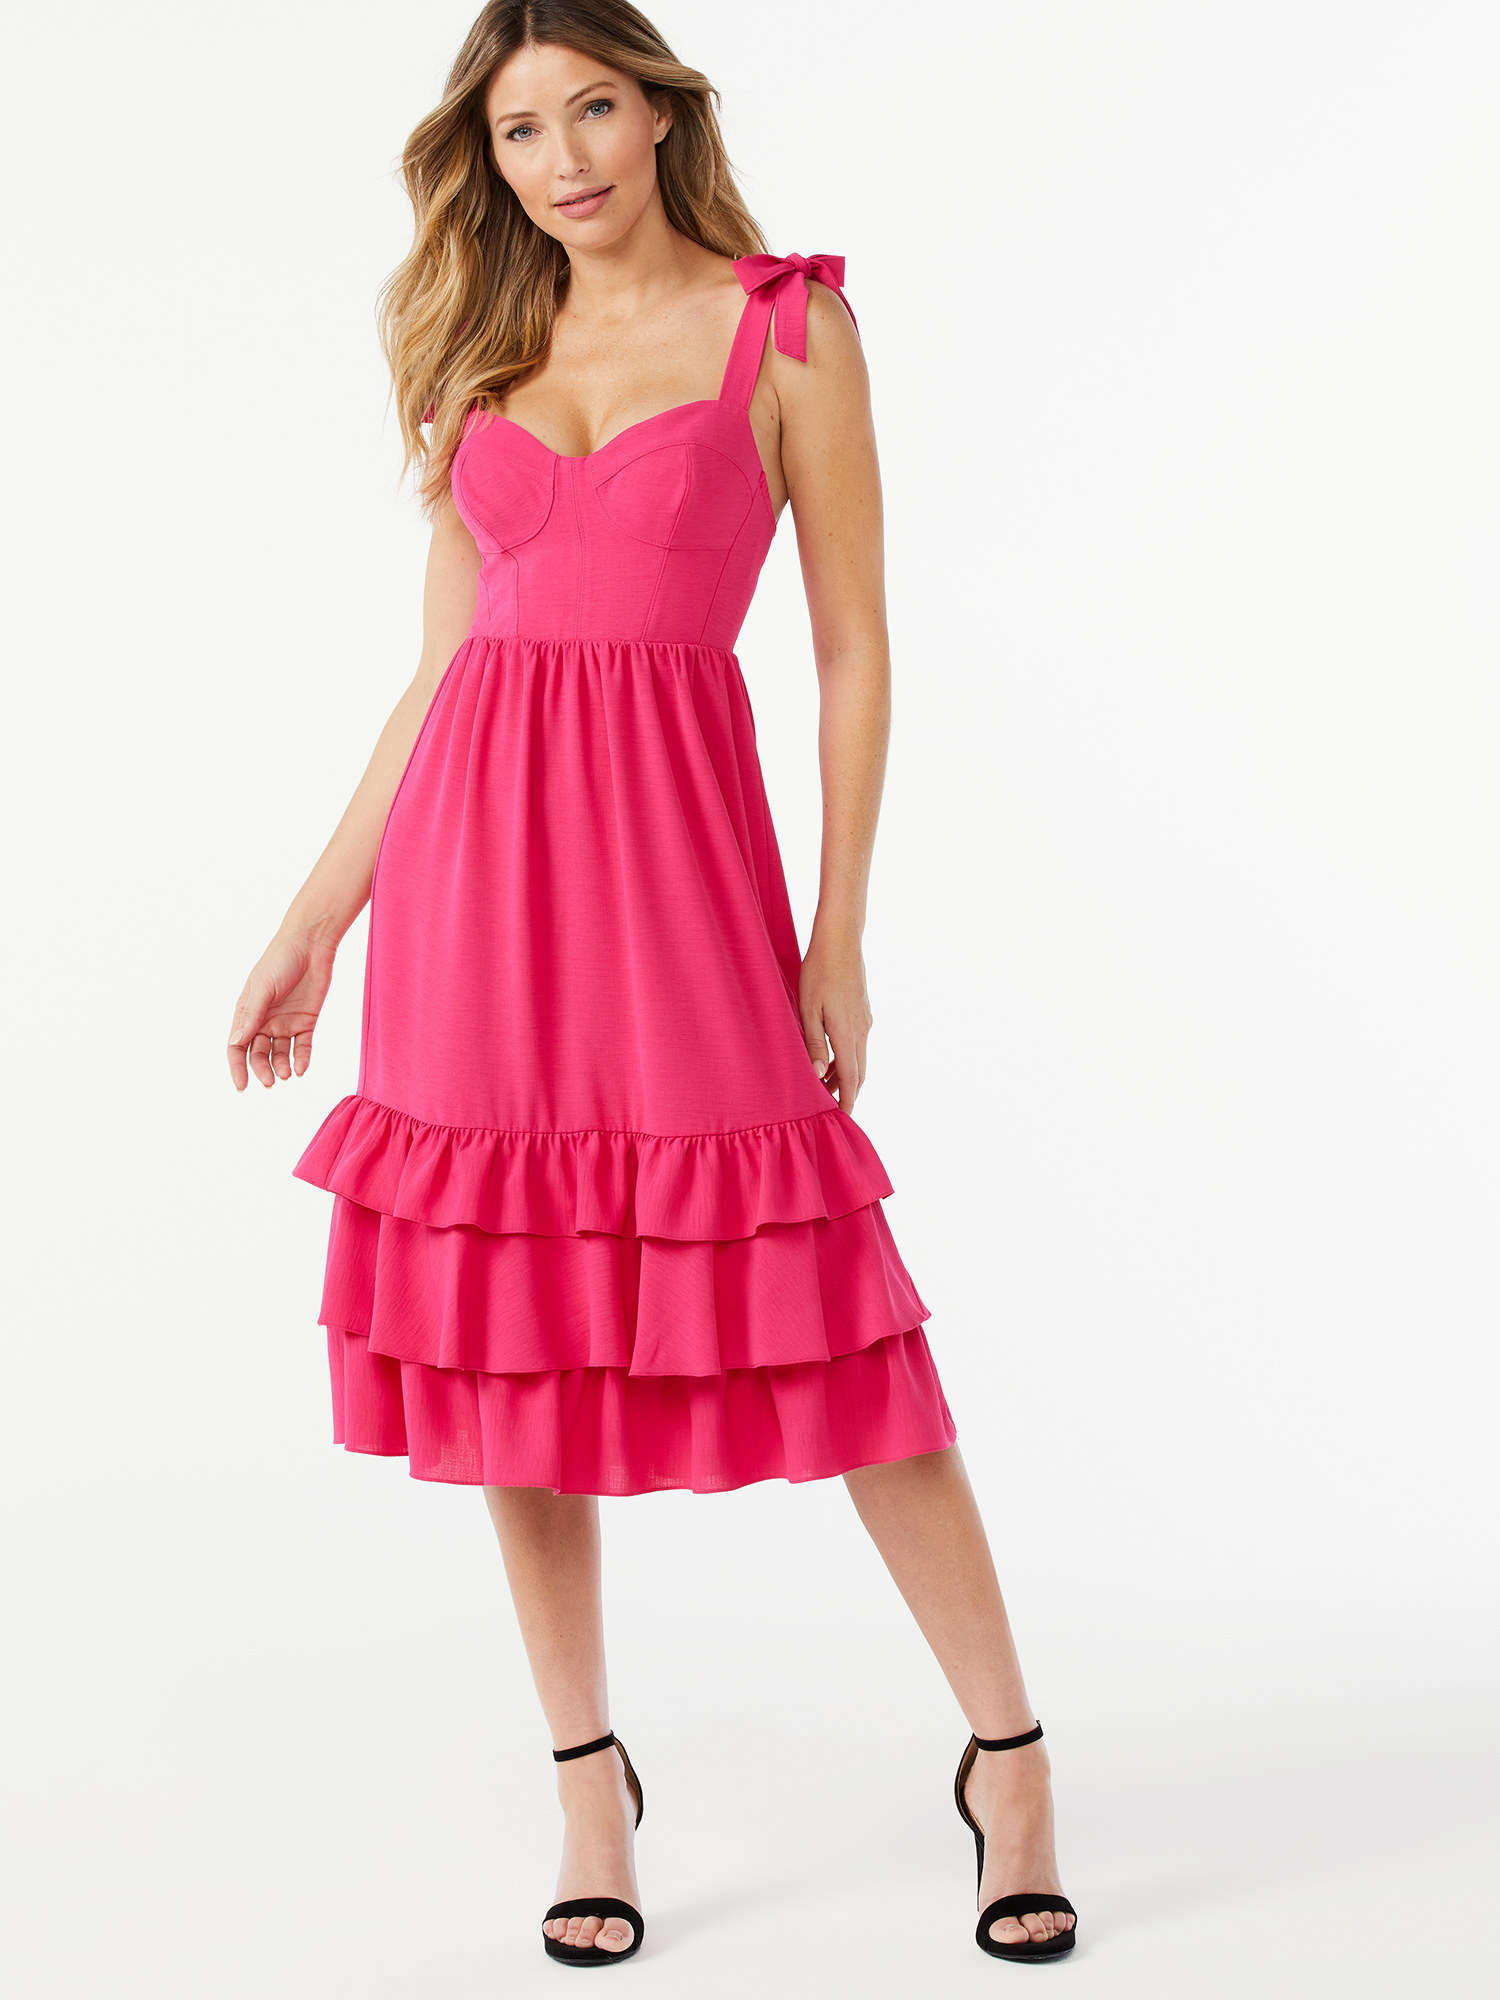 Model wearing the vibrant pink dress